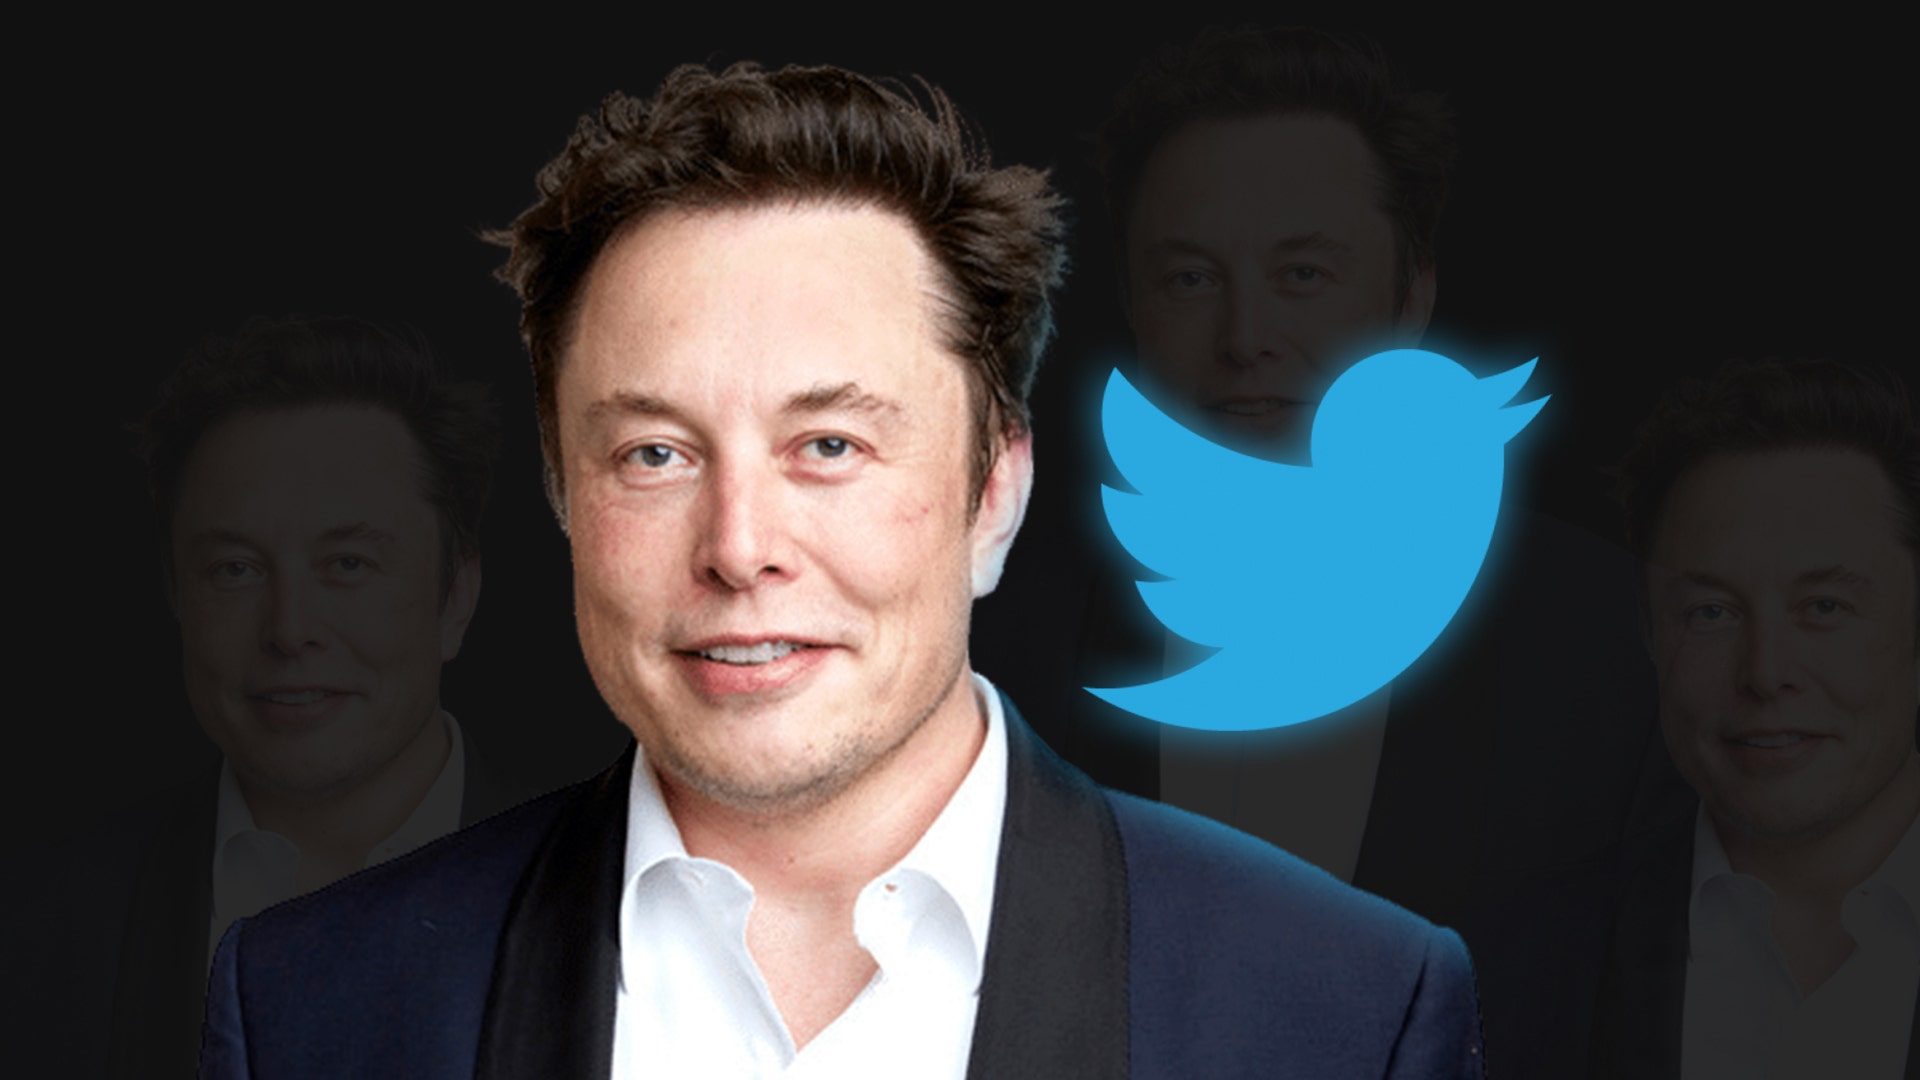 He Who Must Not Be Impersonated? Verified Twitter Accounts Which Mimicked Elon Musk Got The Ax